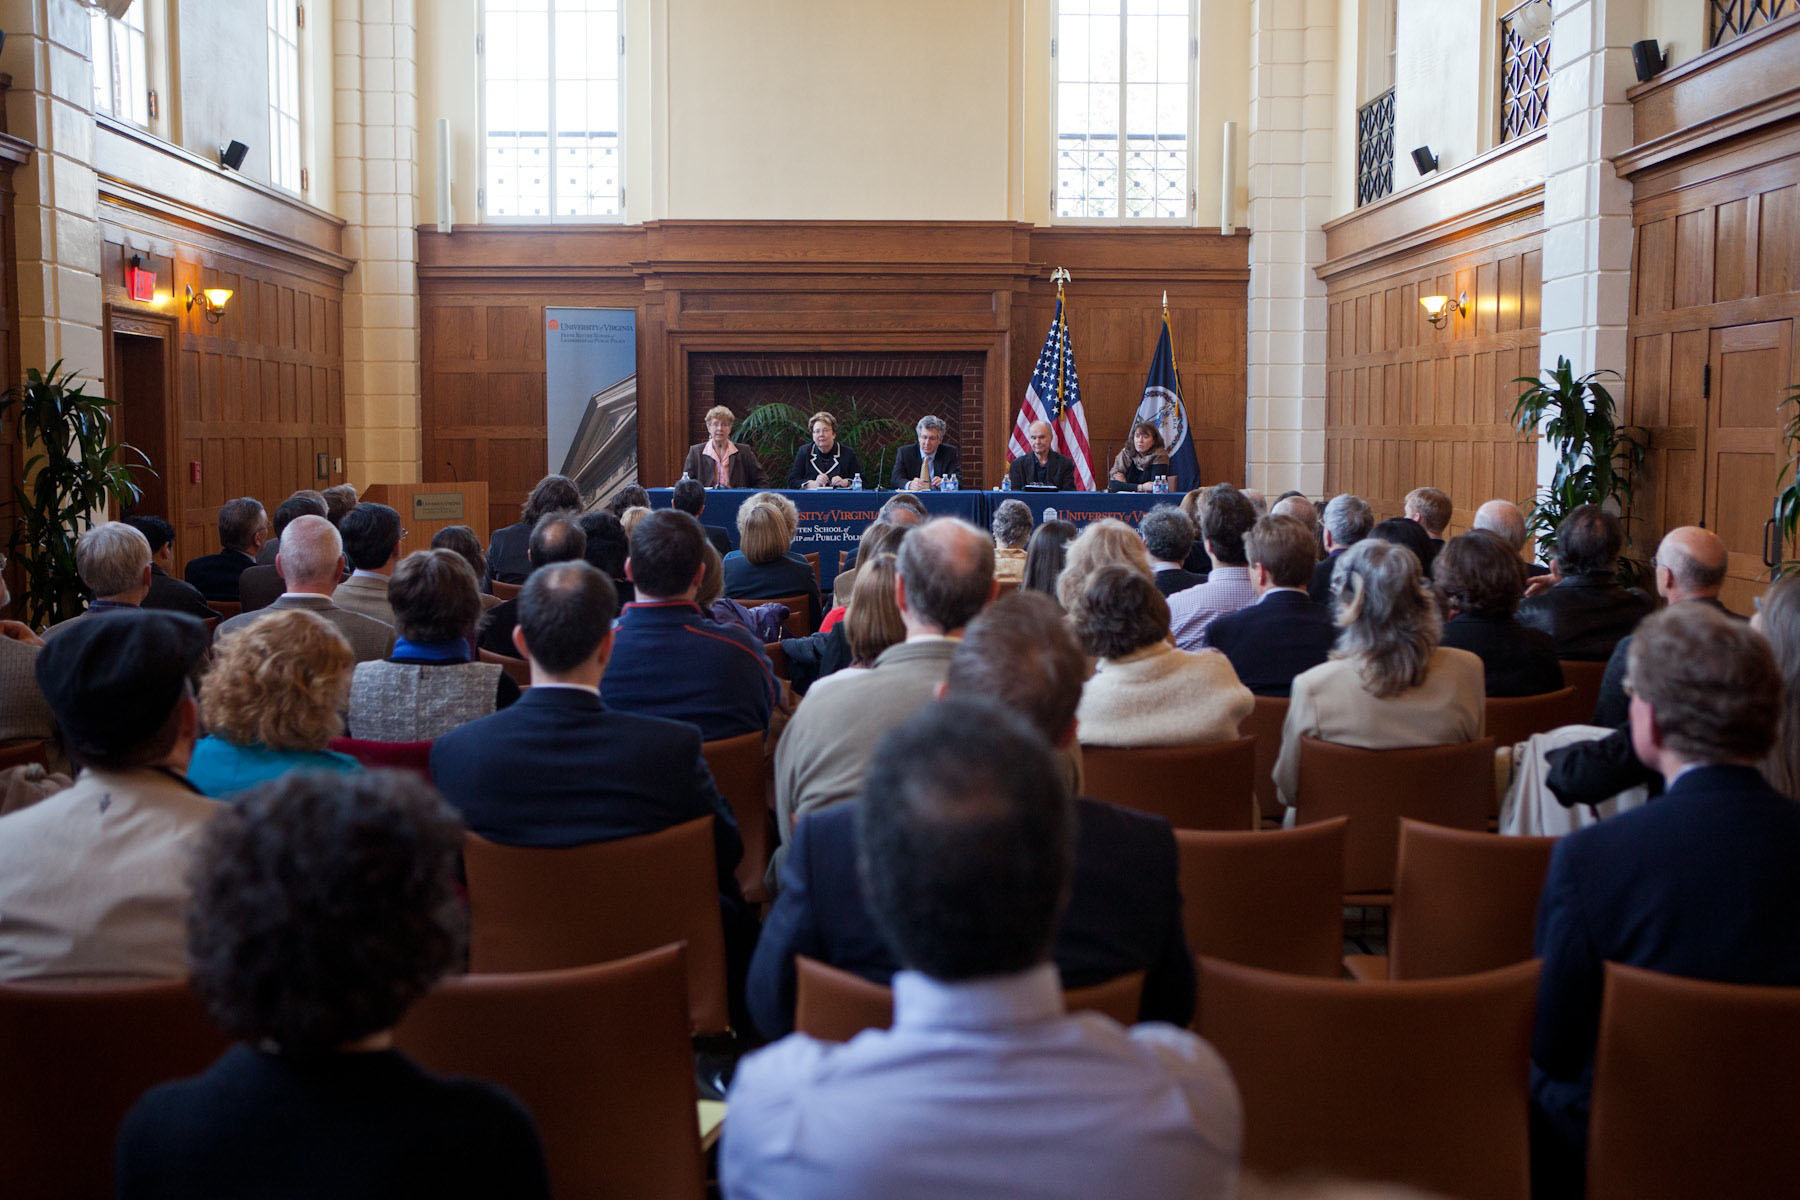 Panel of speakers sit at a table talking to a crowd